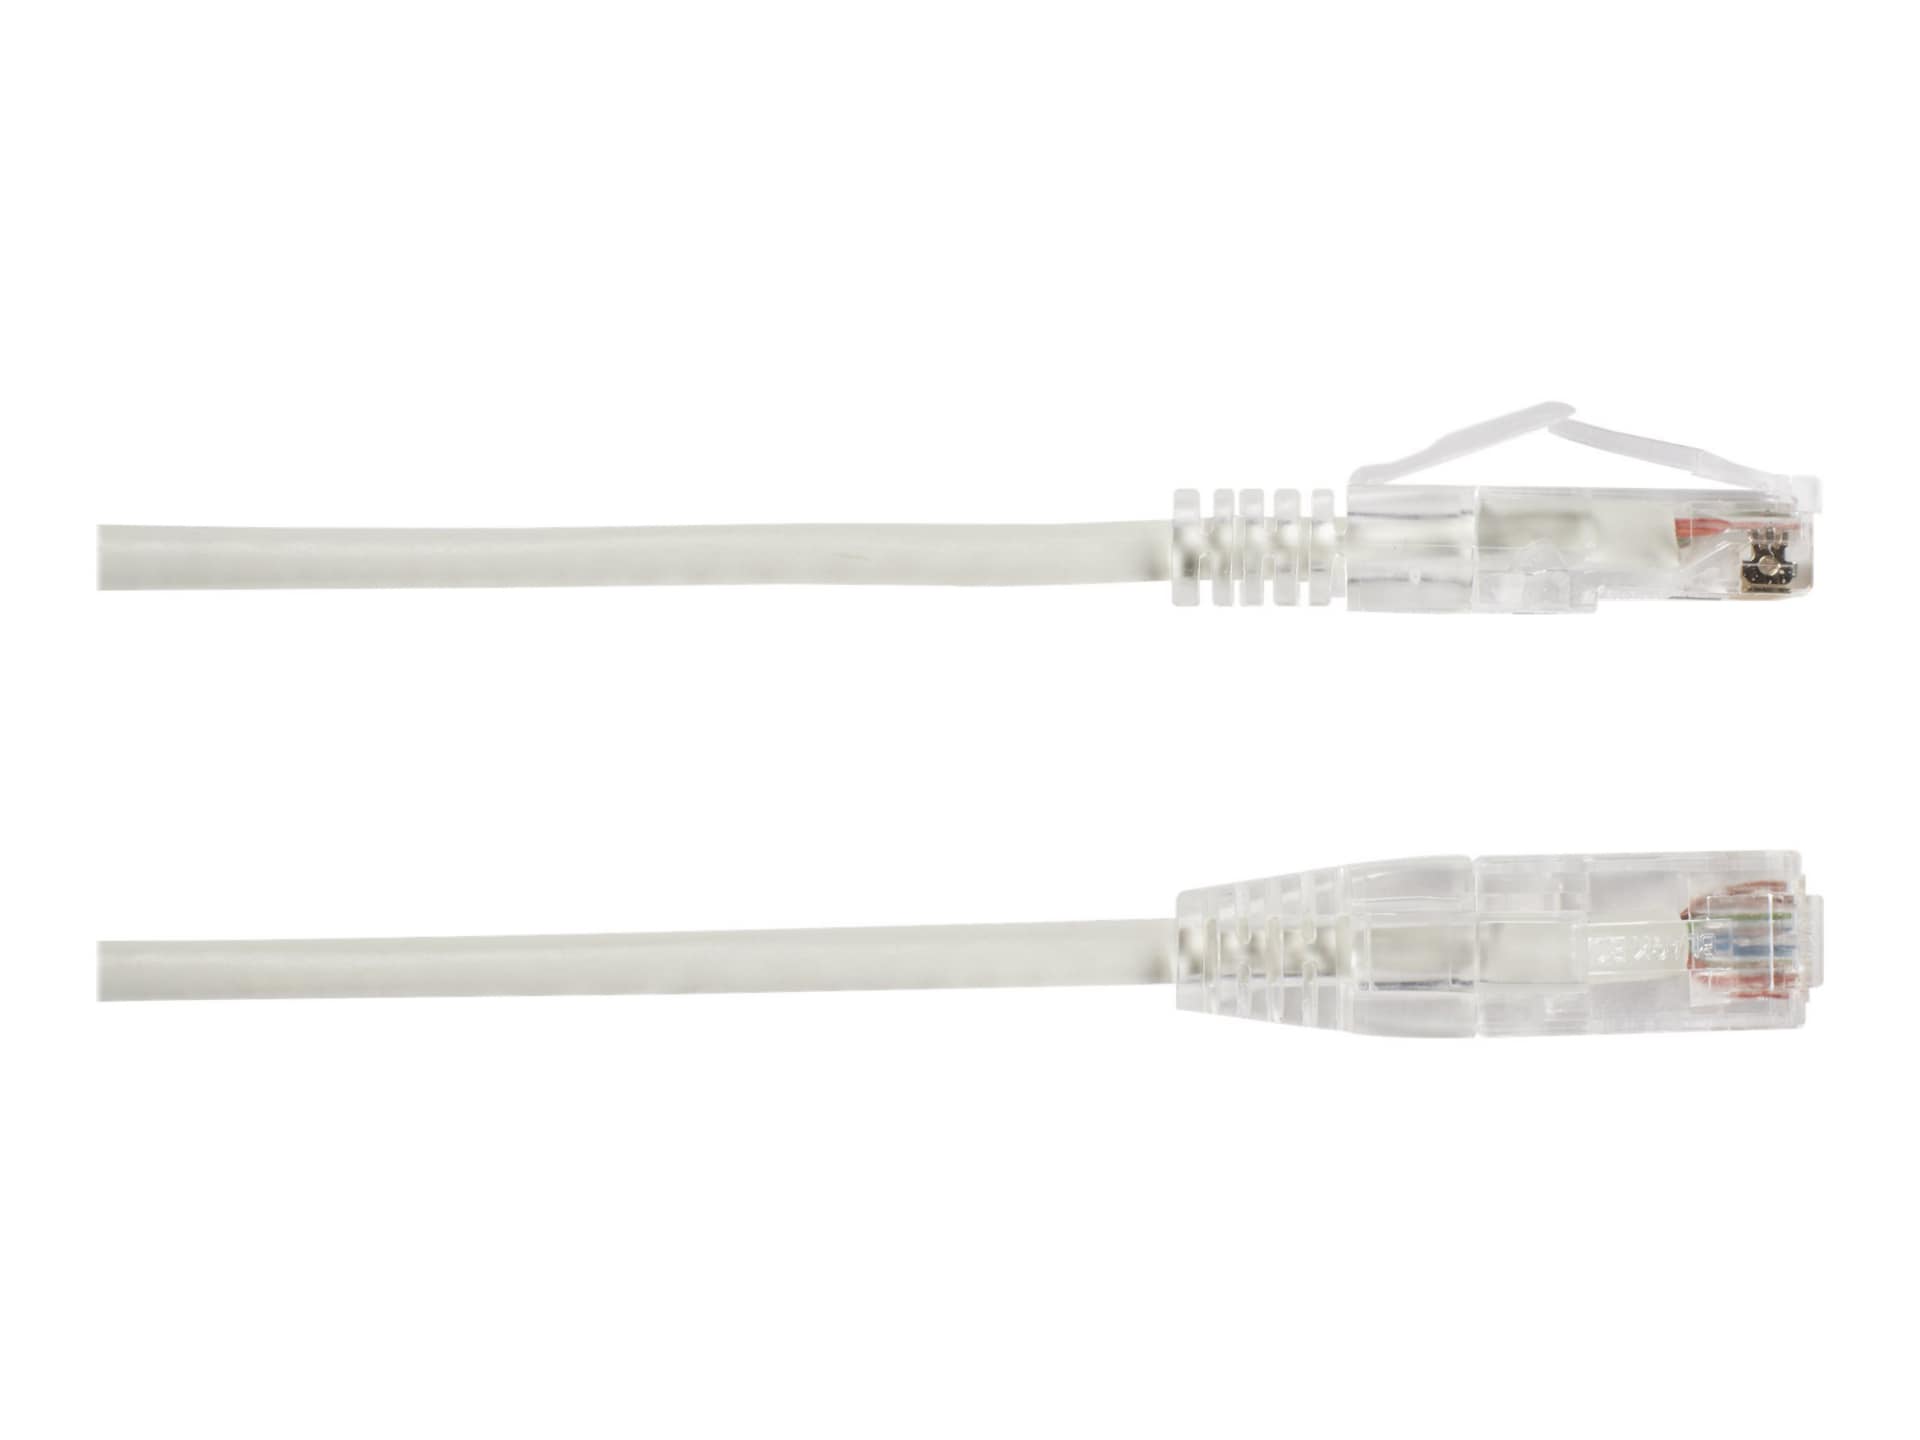 Black Box Slim-Net patch cable - 15 ft - white